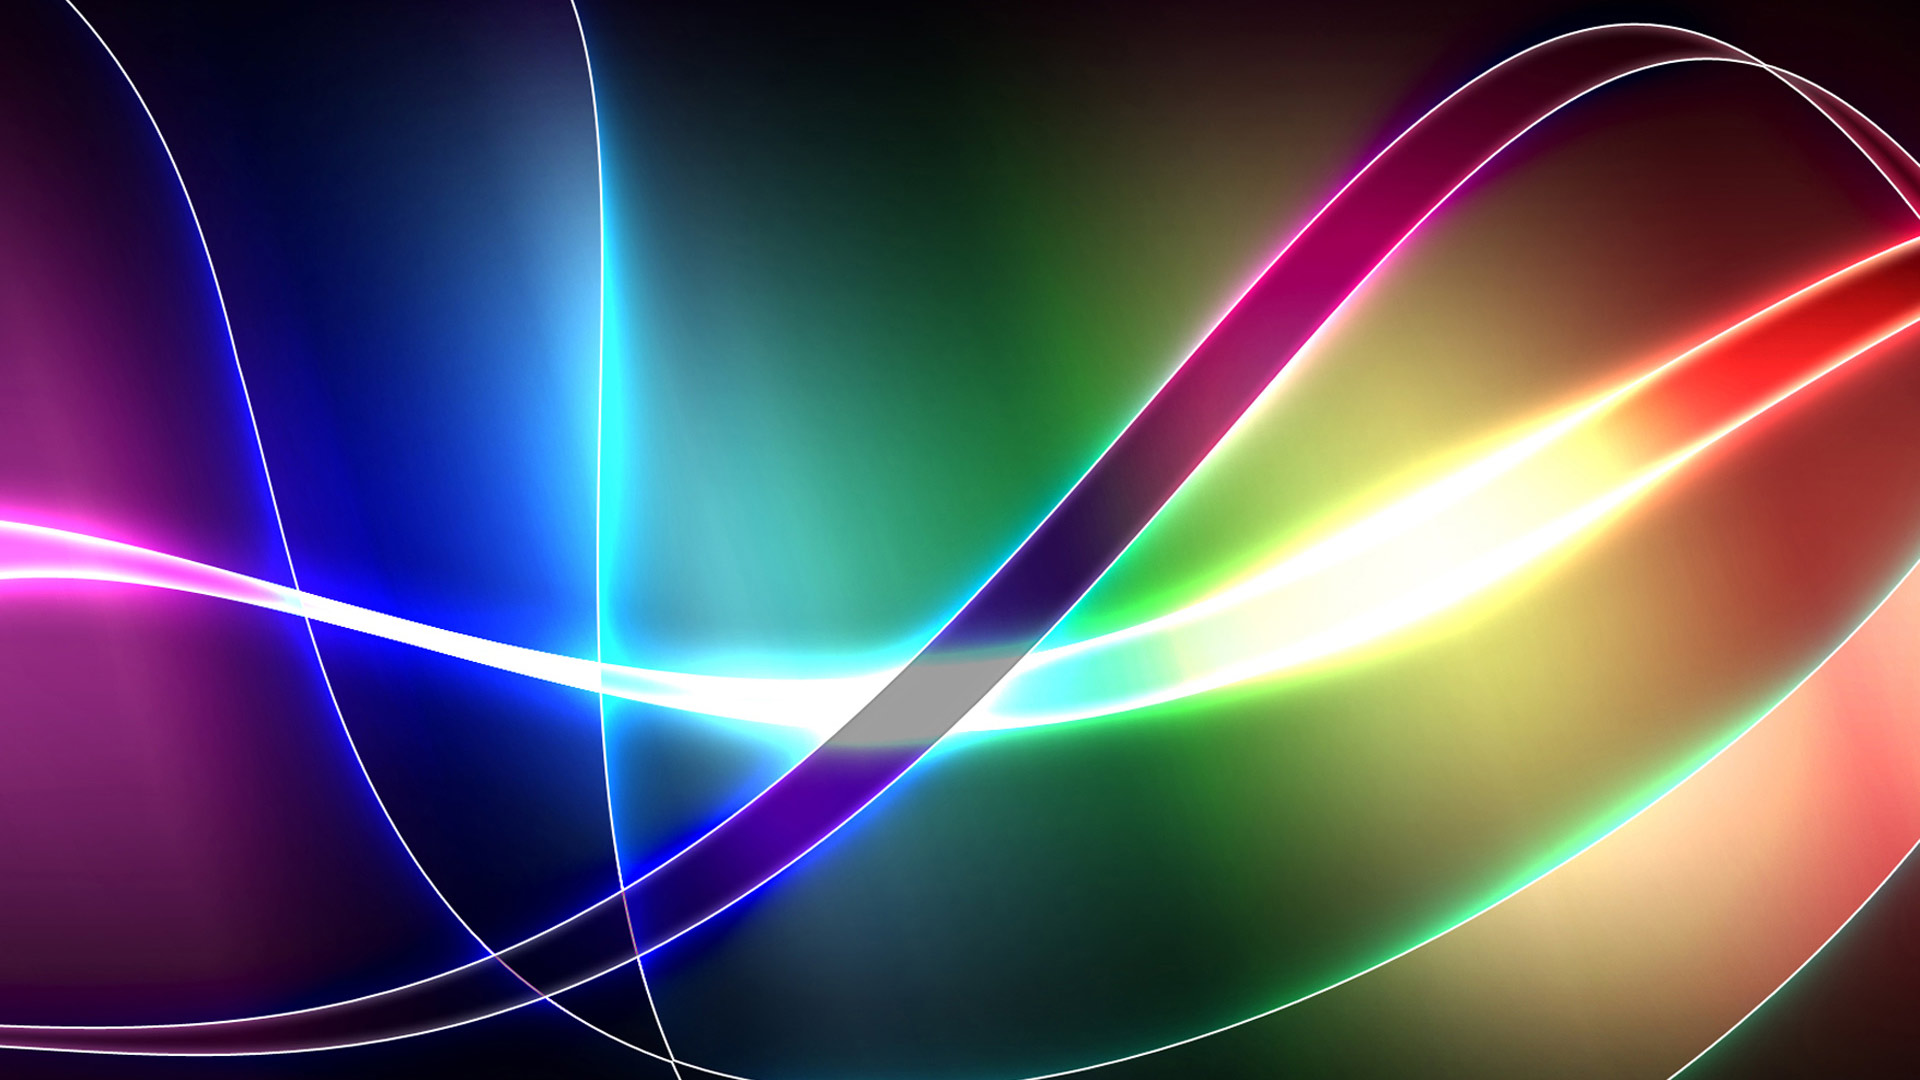 Colorful Abstract Backgrounds Hd Wallpapers in Abstract